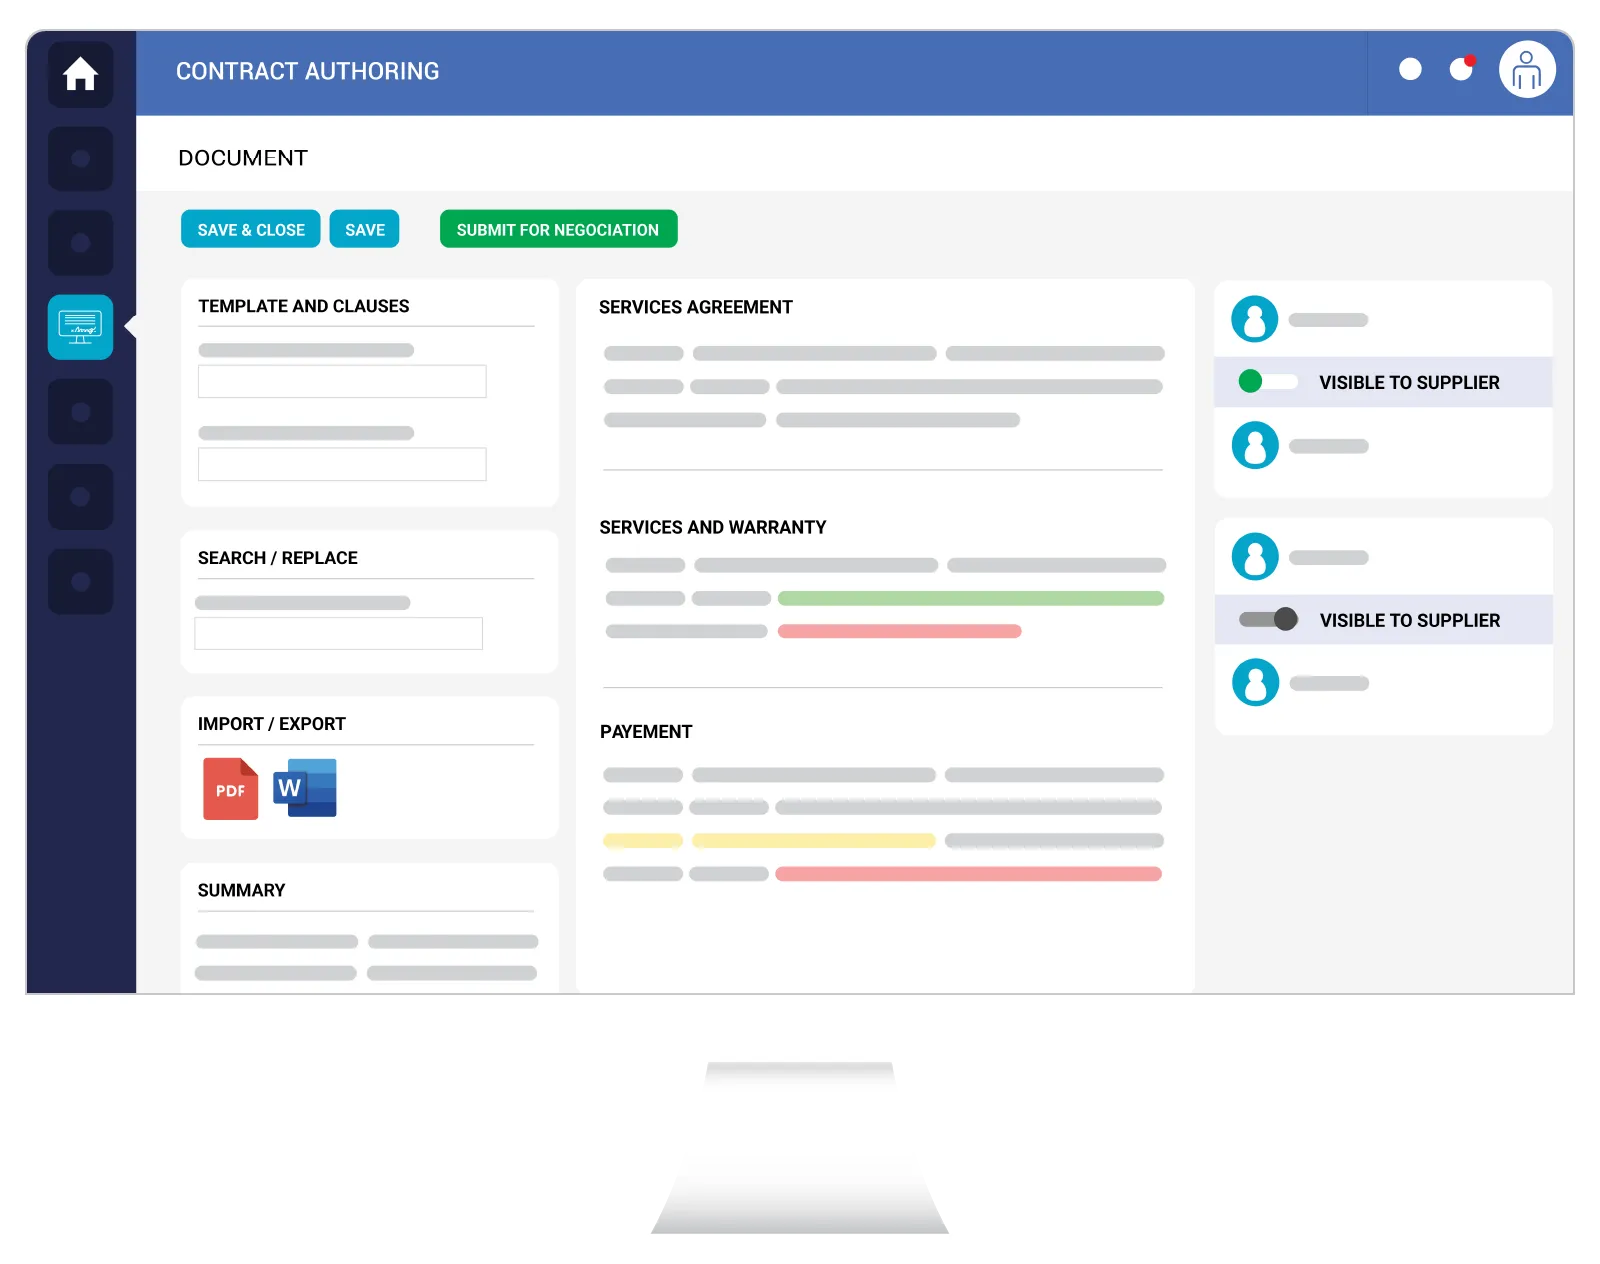 Contract Management: Lock-in Value and Manage Risk Across the Contract Lifecycle
- Digitize & centralize contracts for complete visibility
- Accelerate cycle times and time-to-value
- Insightful contract analytics and lifecycle management